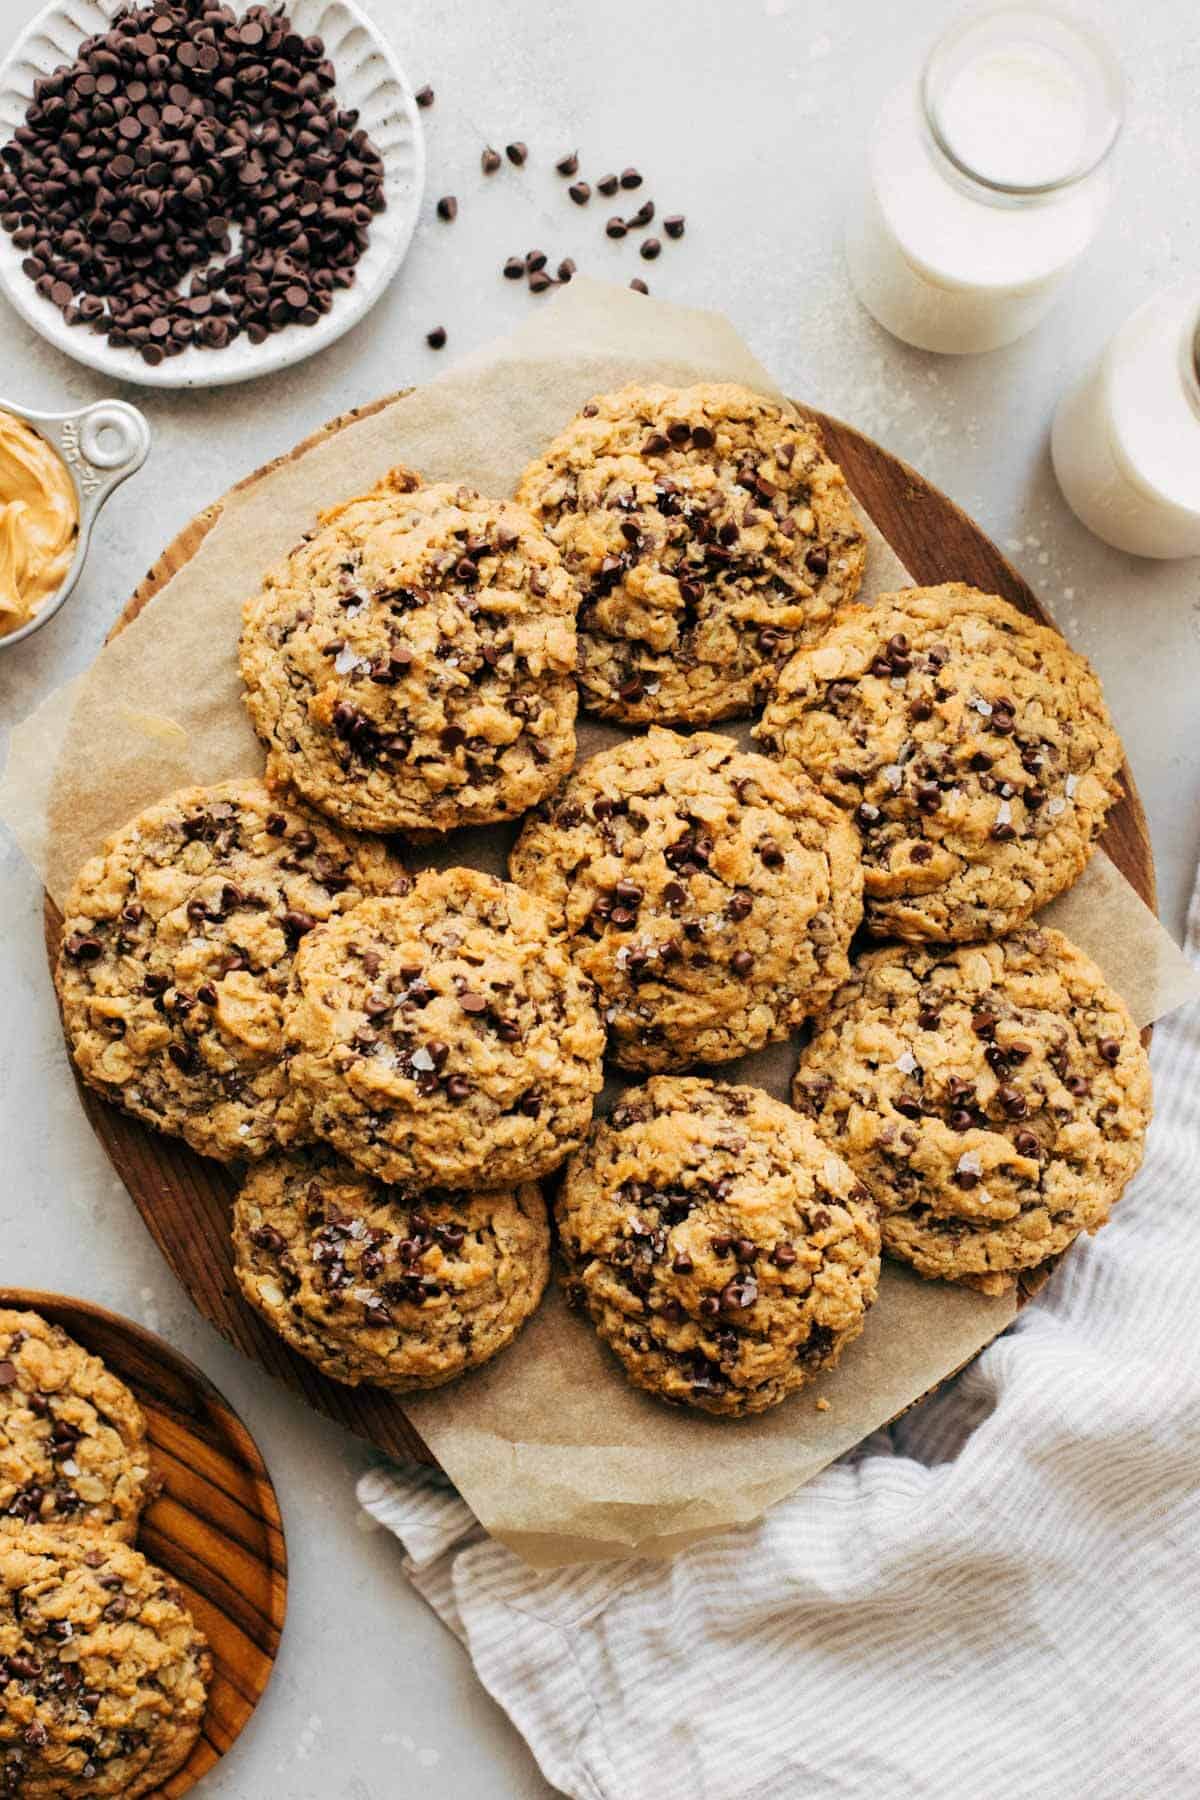 Egg-Free Peanut Butter Cookies with Chocolate Chips